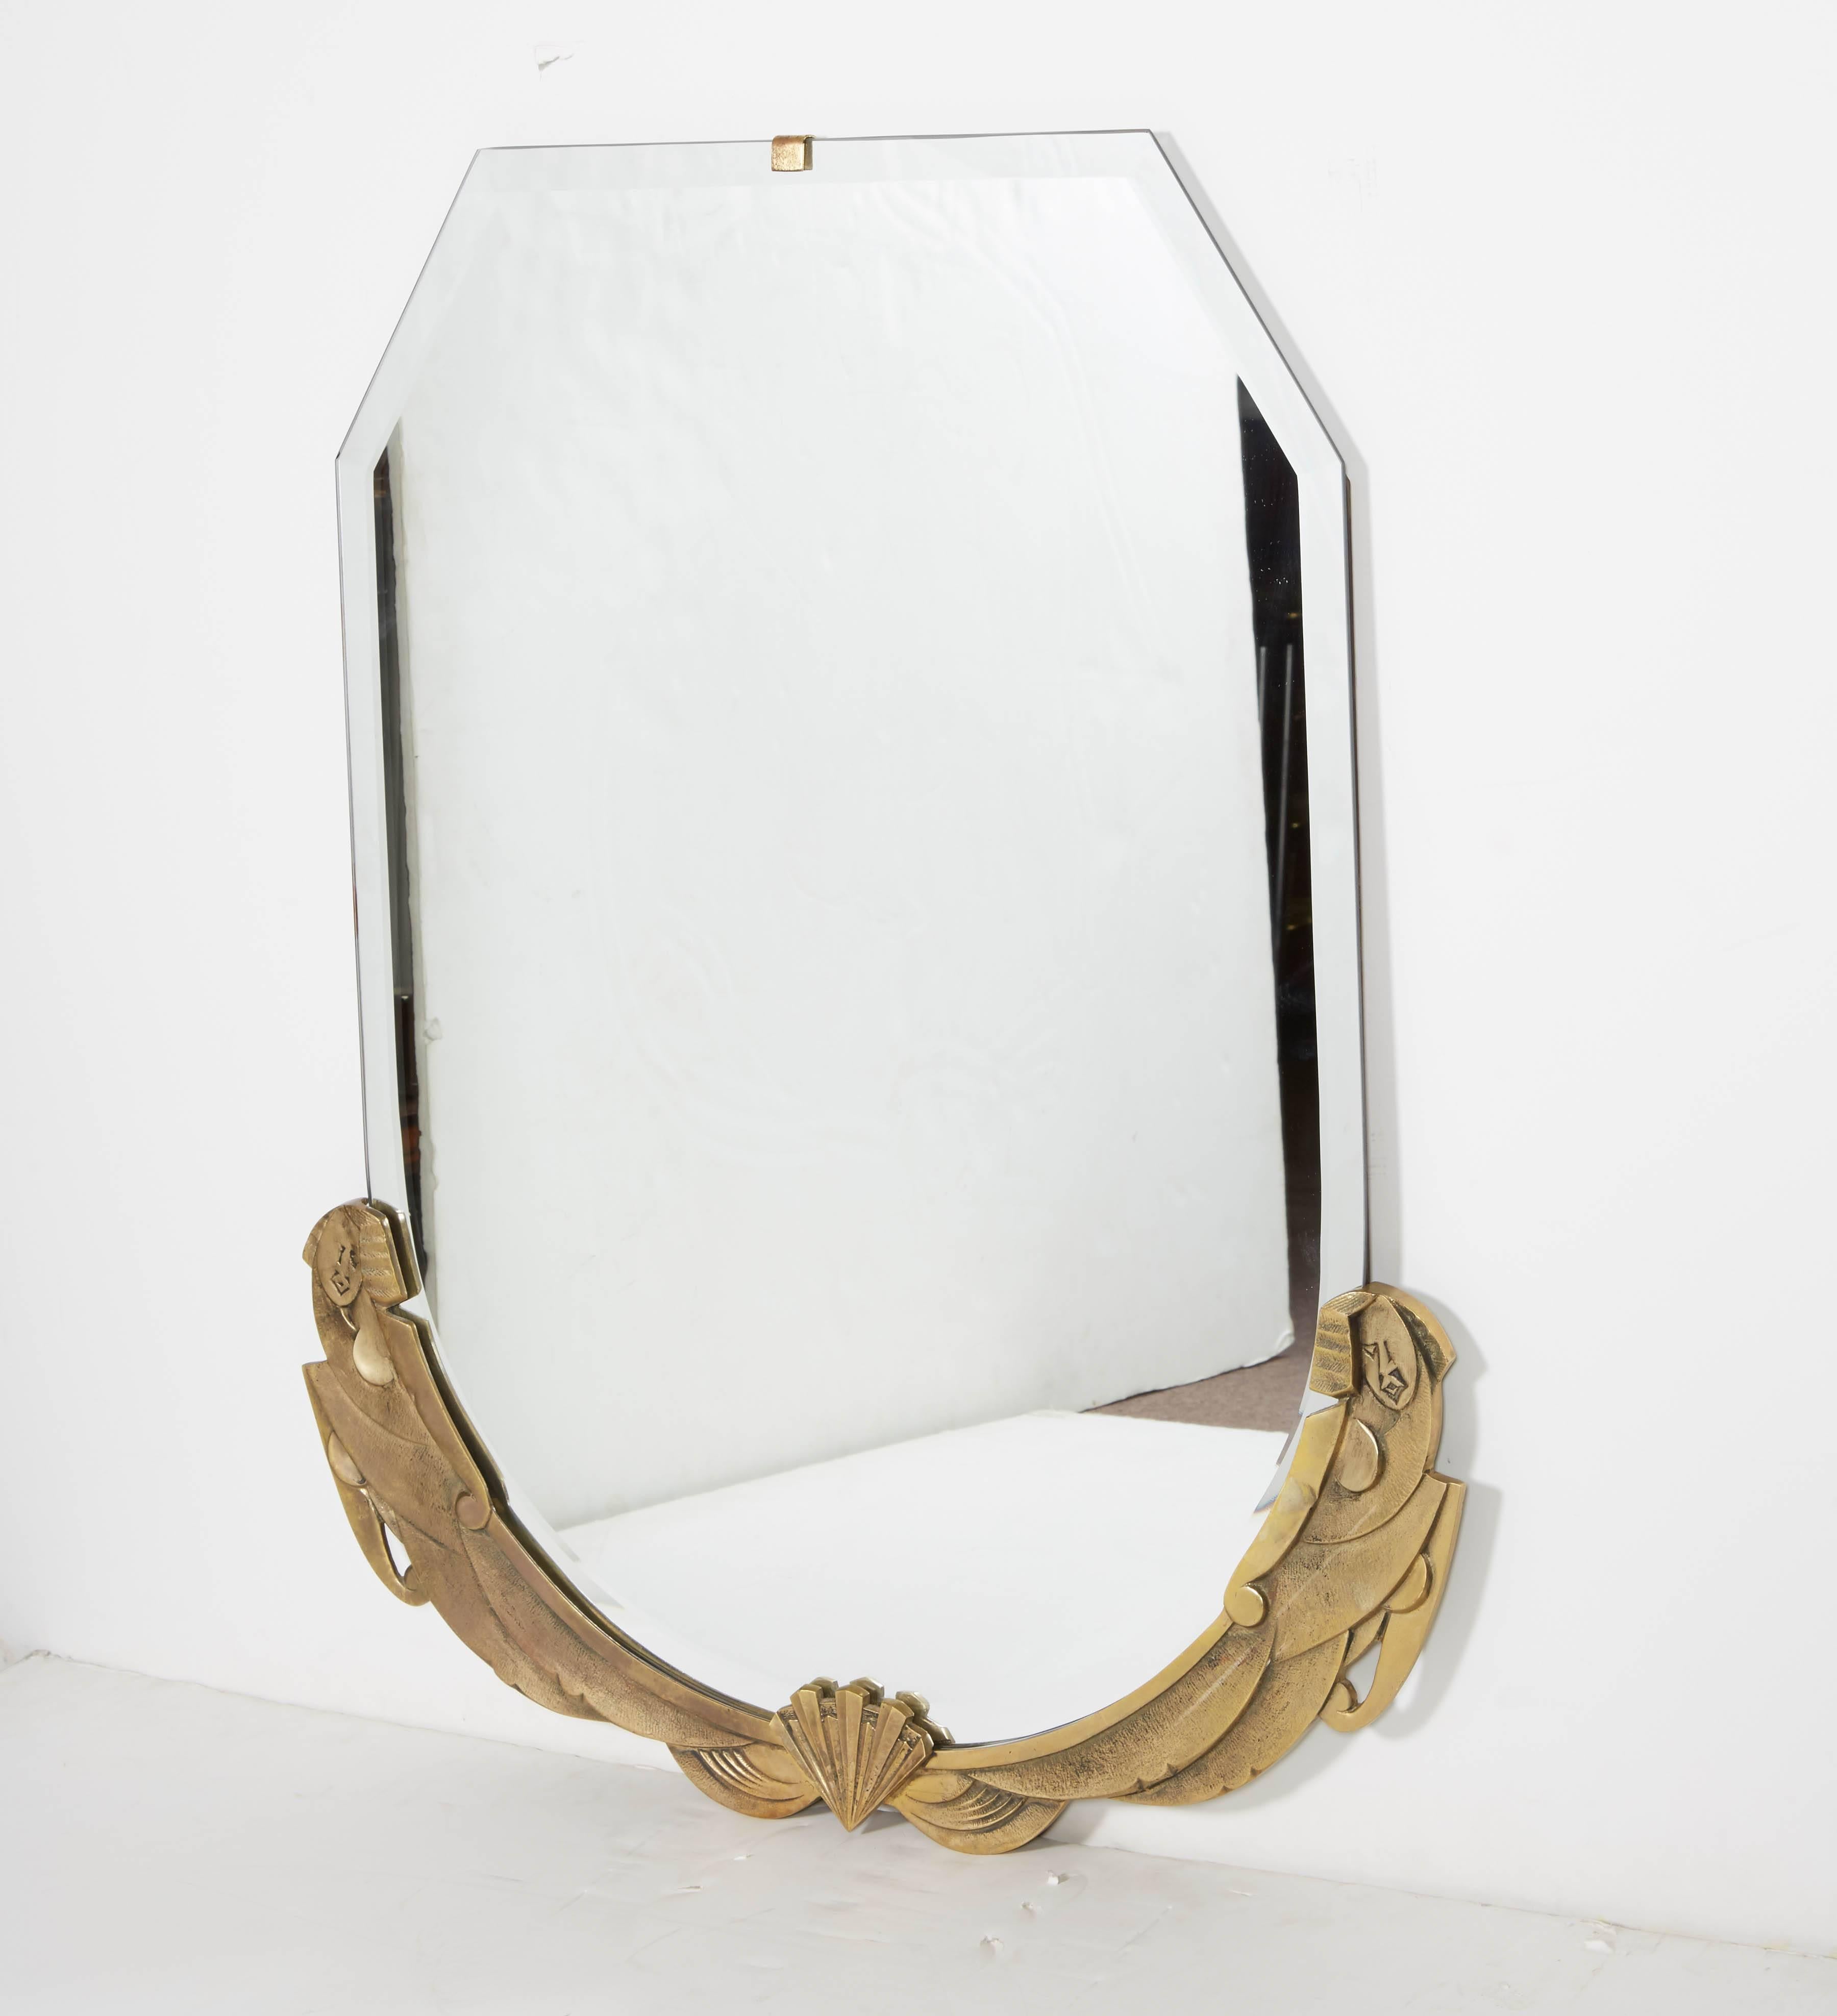 20th Century French Bronze Bevelled Mirror with Stylized Nude Women Surround